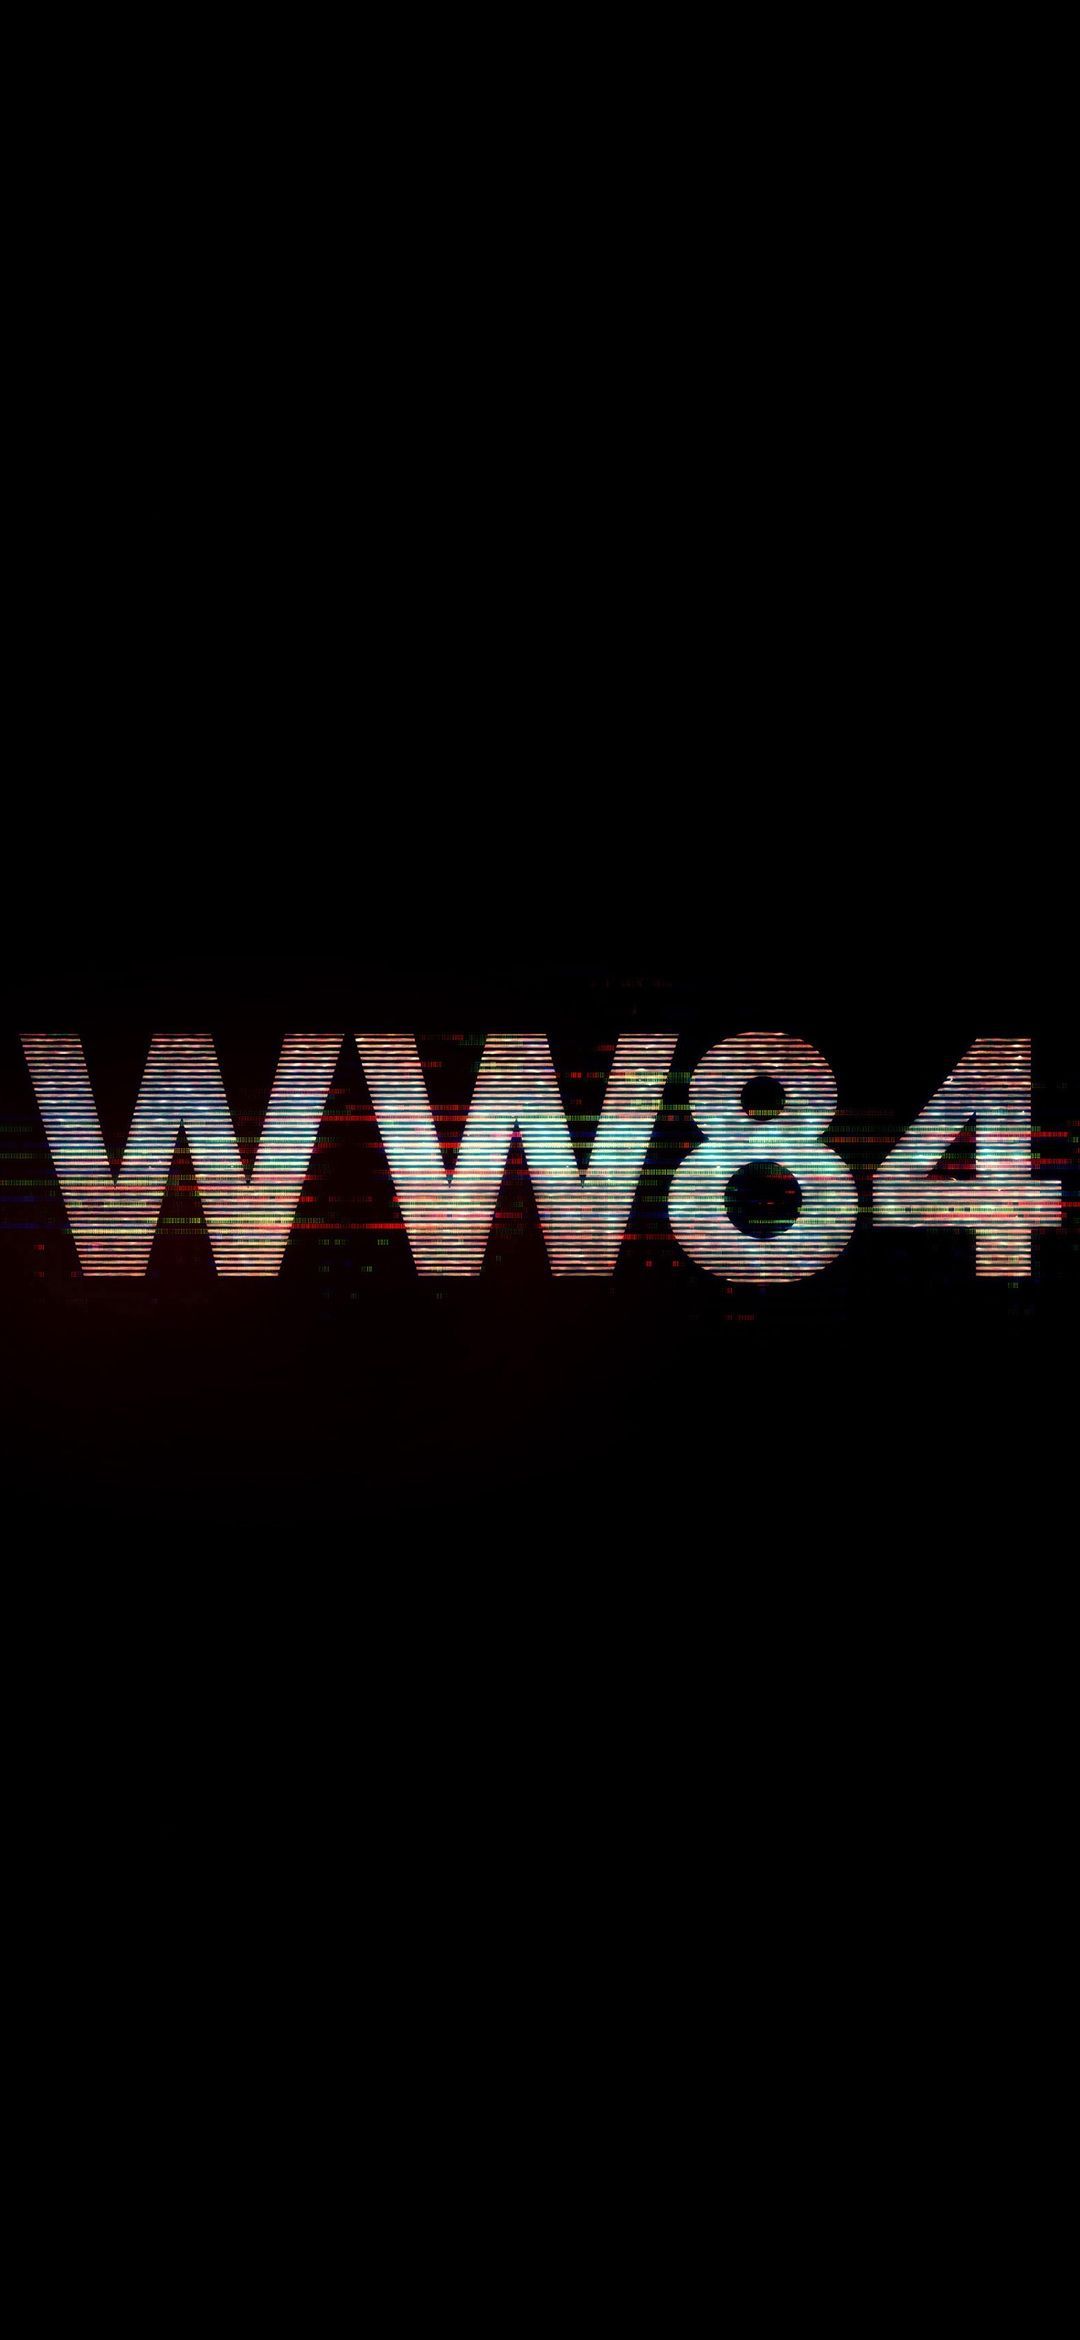 WW84(Wonder Woman) Wallpaper for iphone, follow us on are website